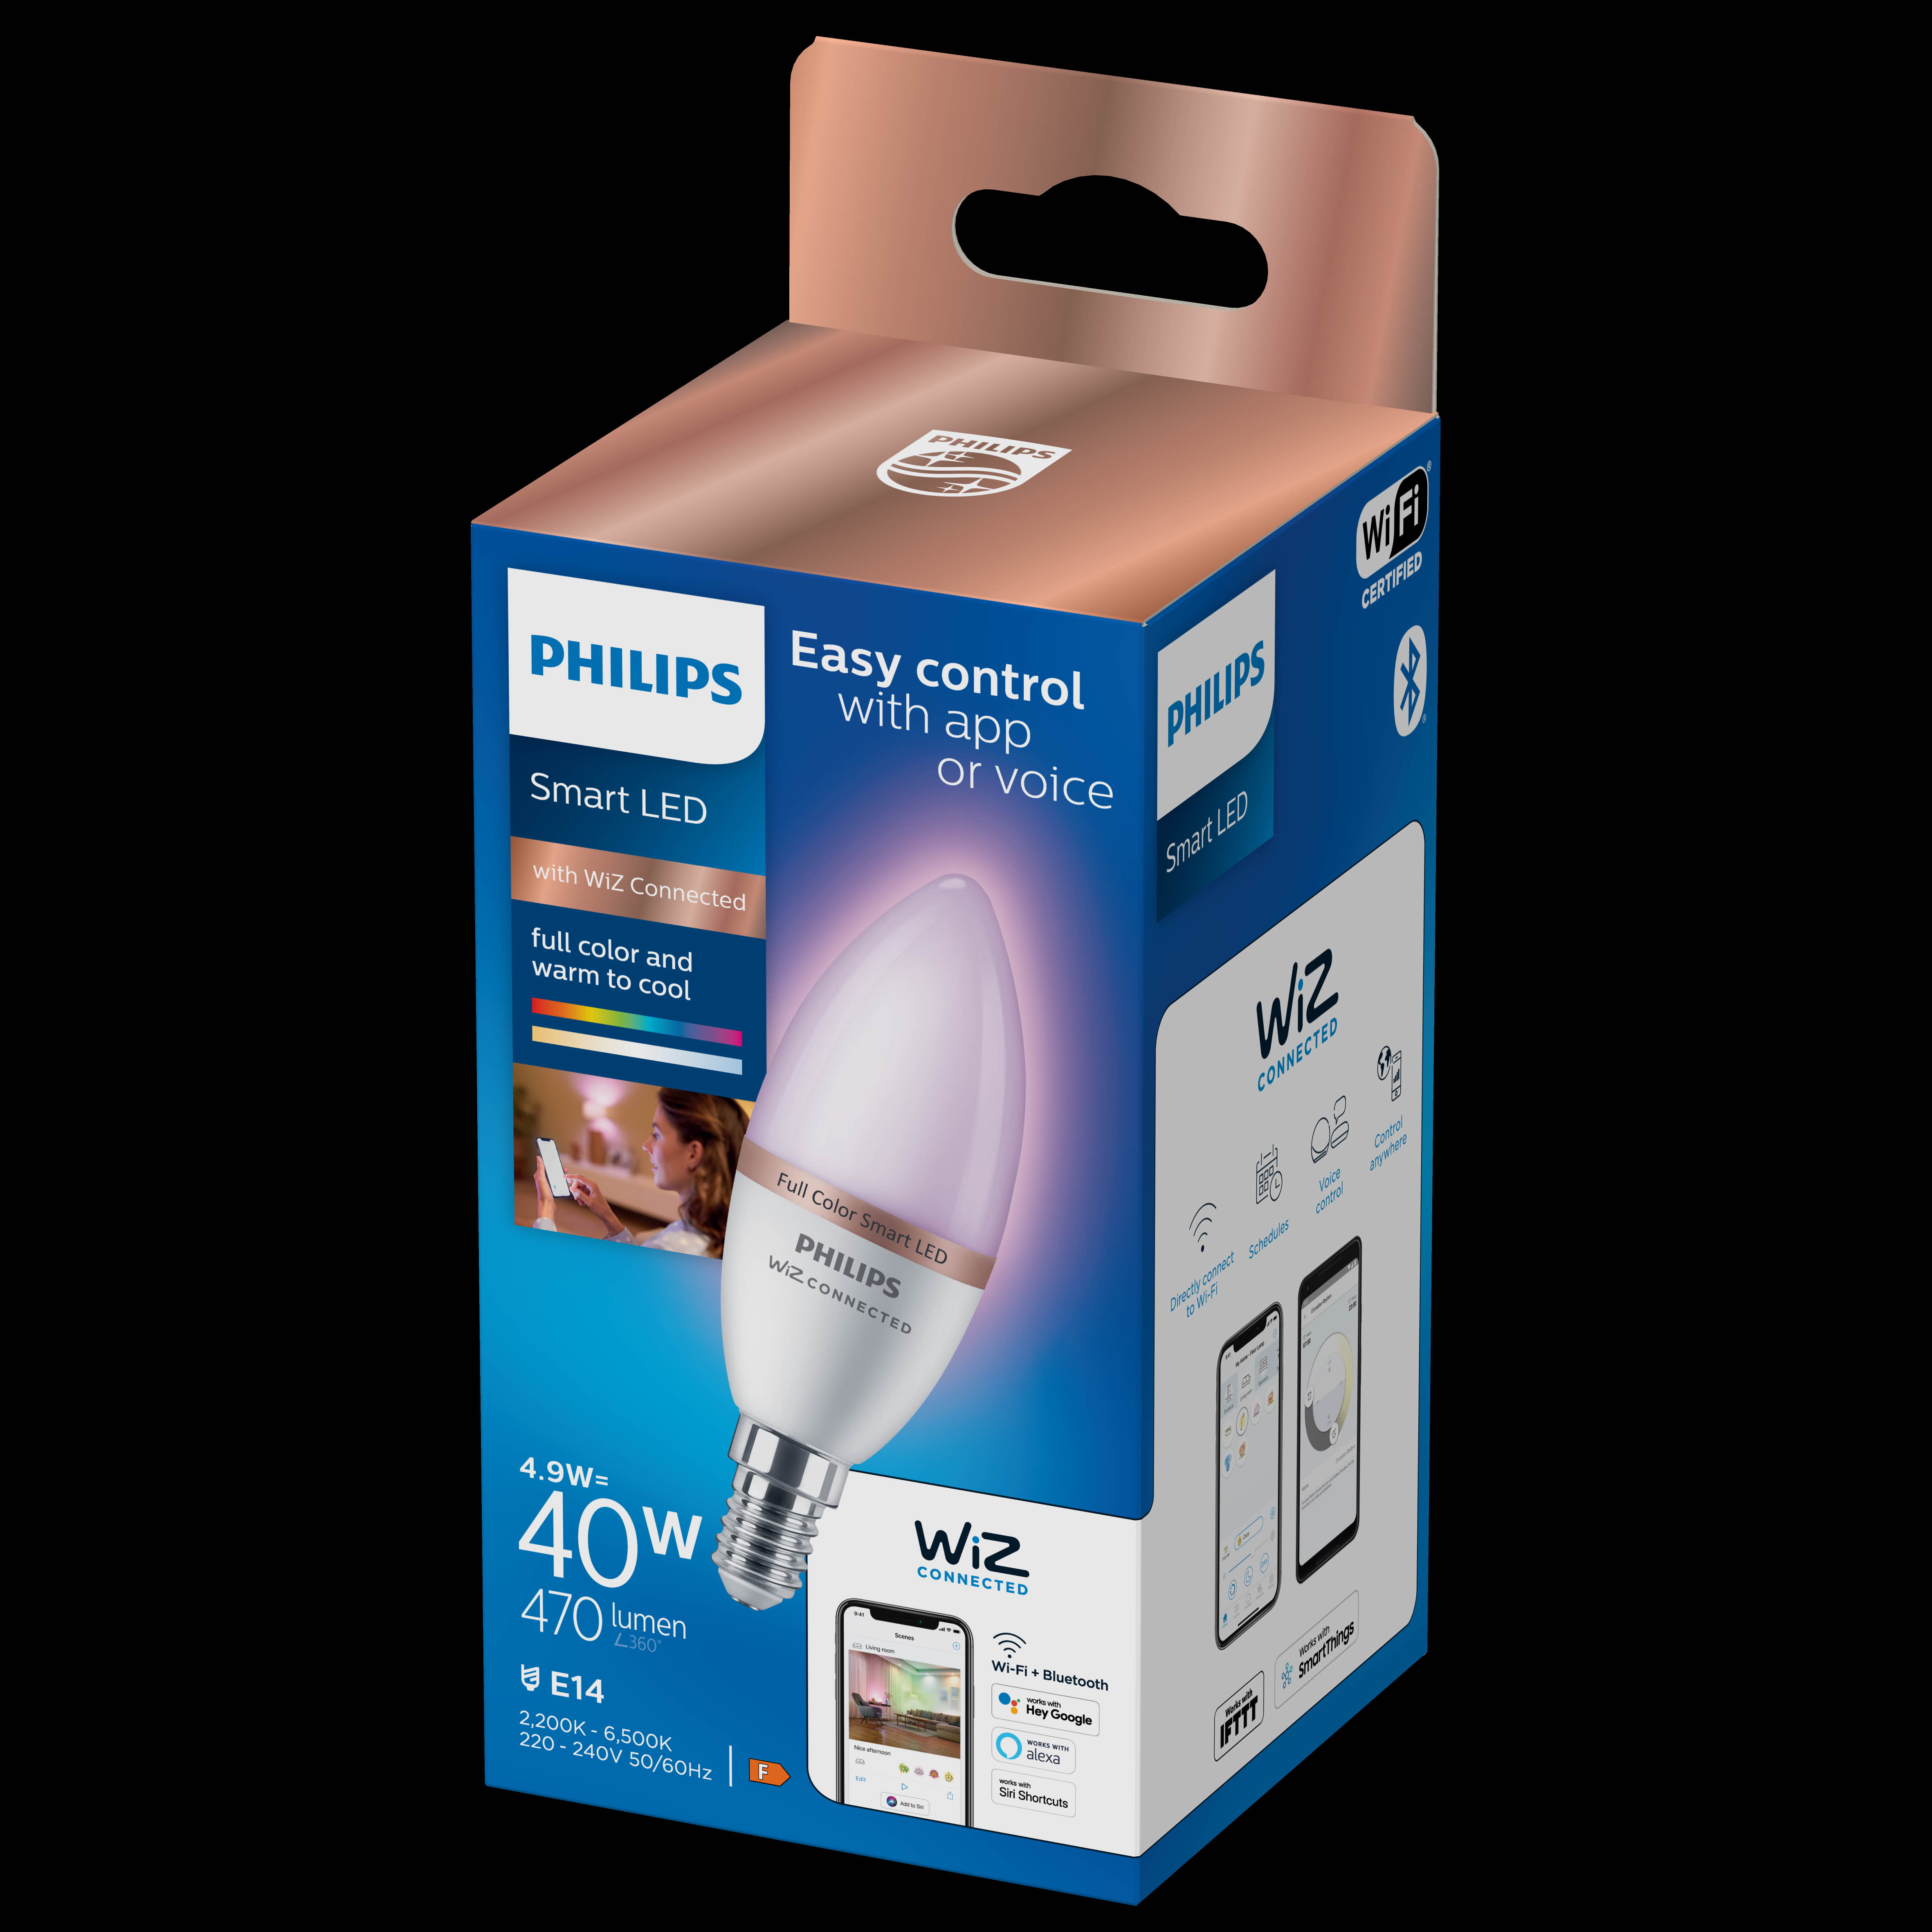 PHILIPS Smart LED E14, WiZ connected, 4,9 W, 470 lm, Full color, dimmbar